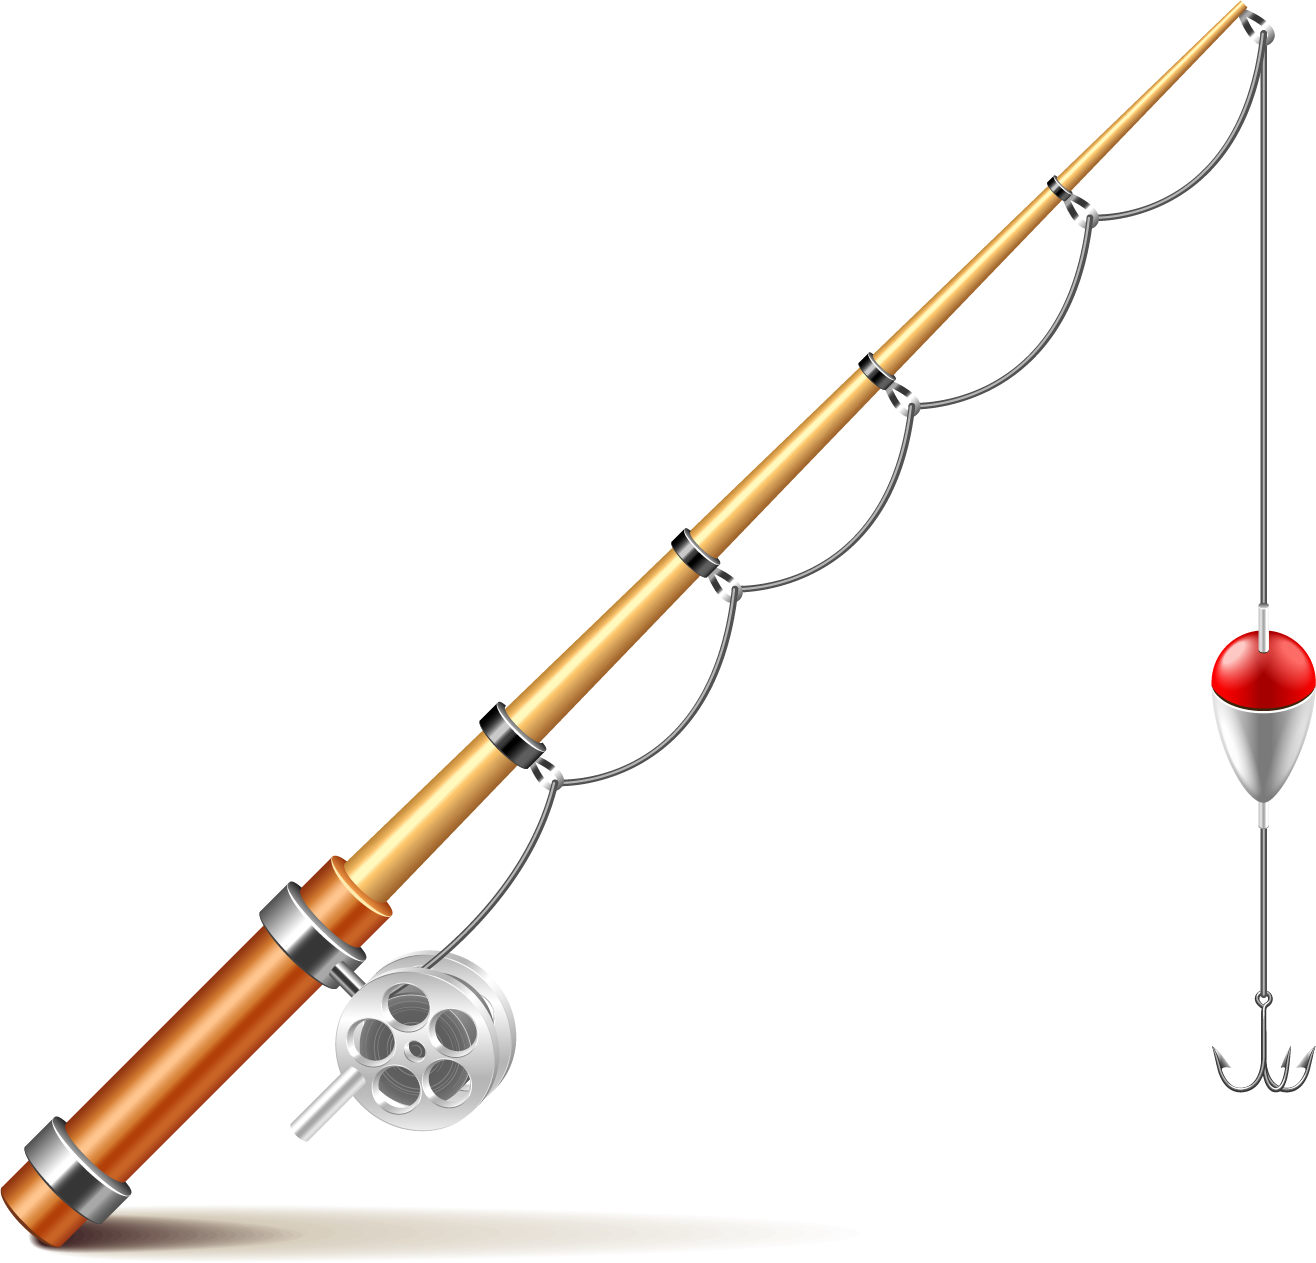 Fishing Rod Vector Free Download at GetDrawings | Free download